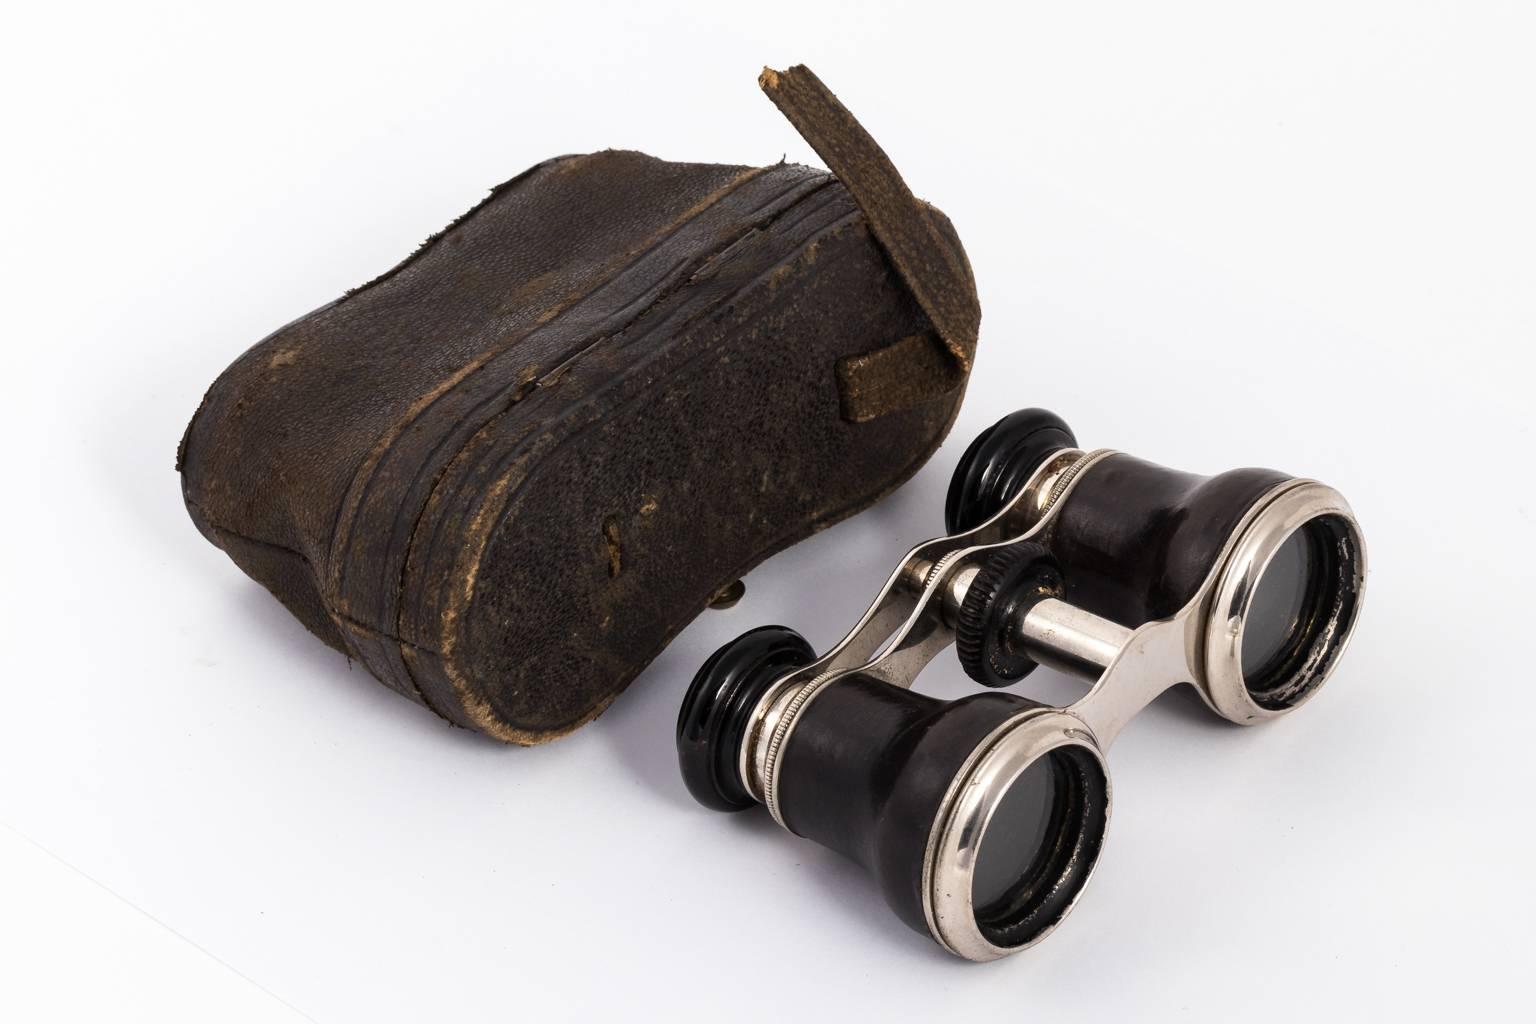 Circa early 20th century Leather bound opera glasses in a polished metal finish with matching box.